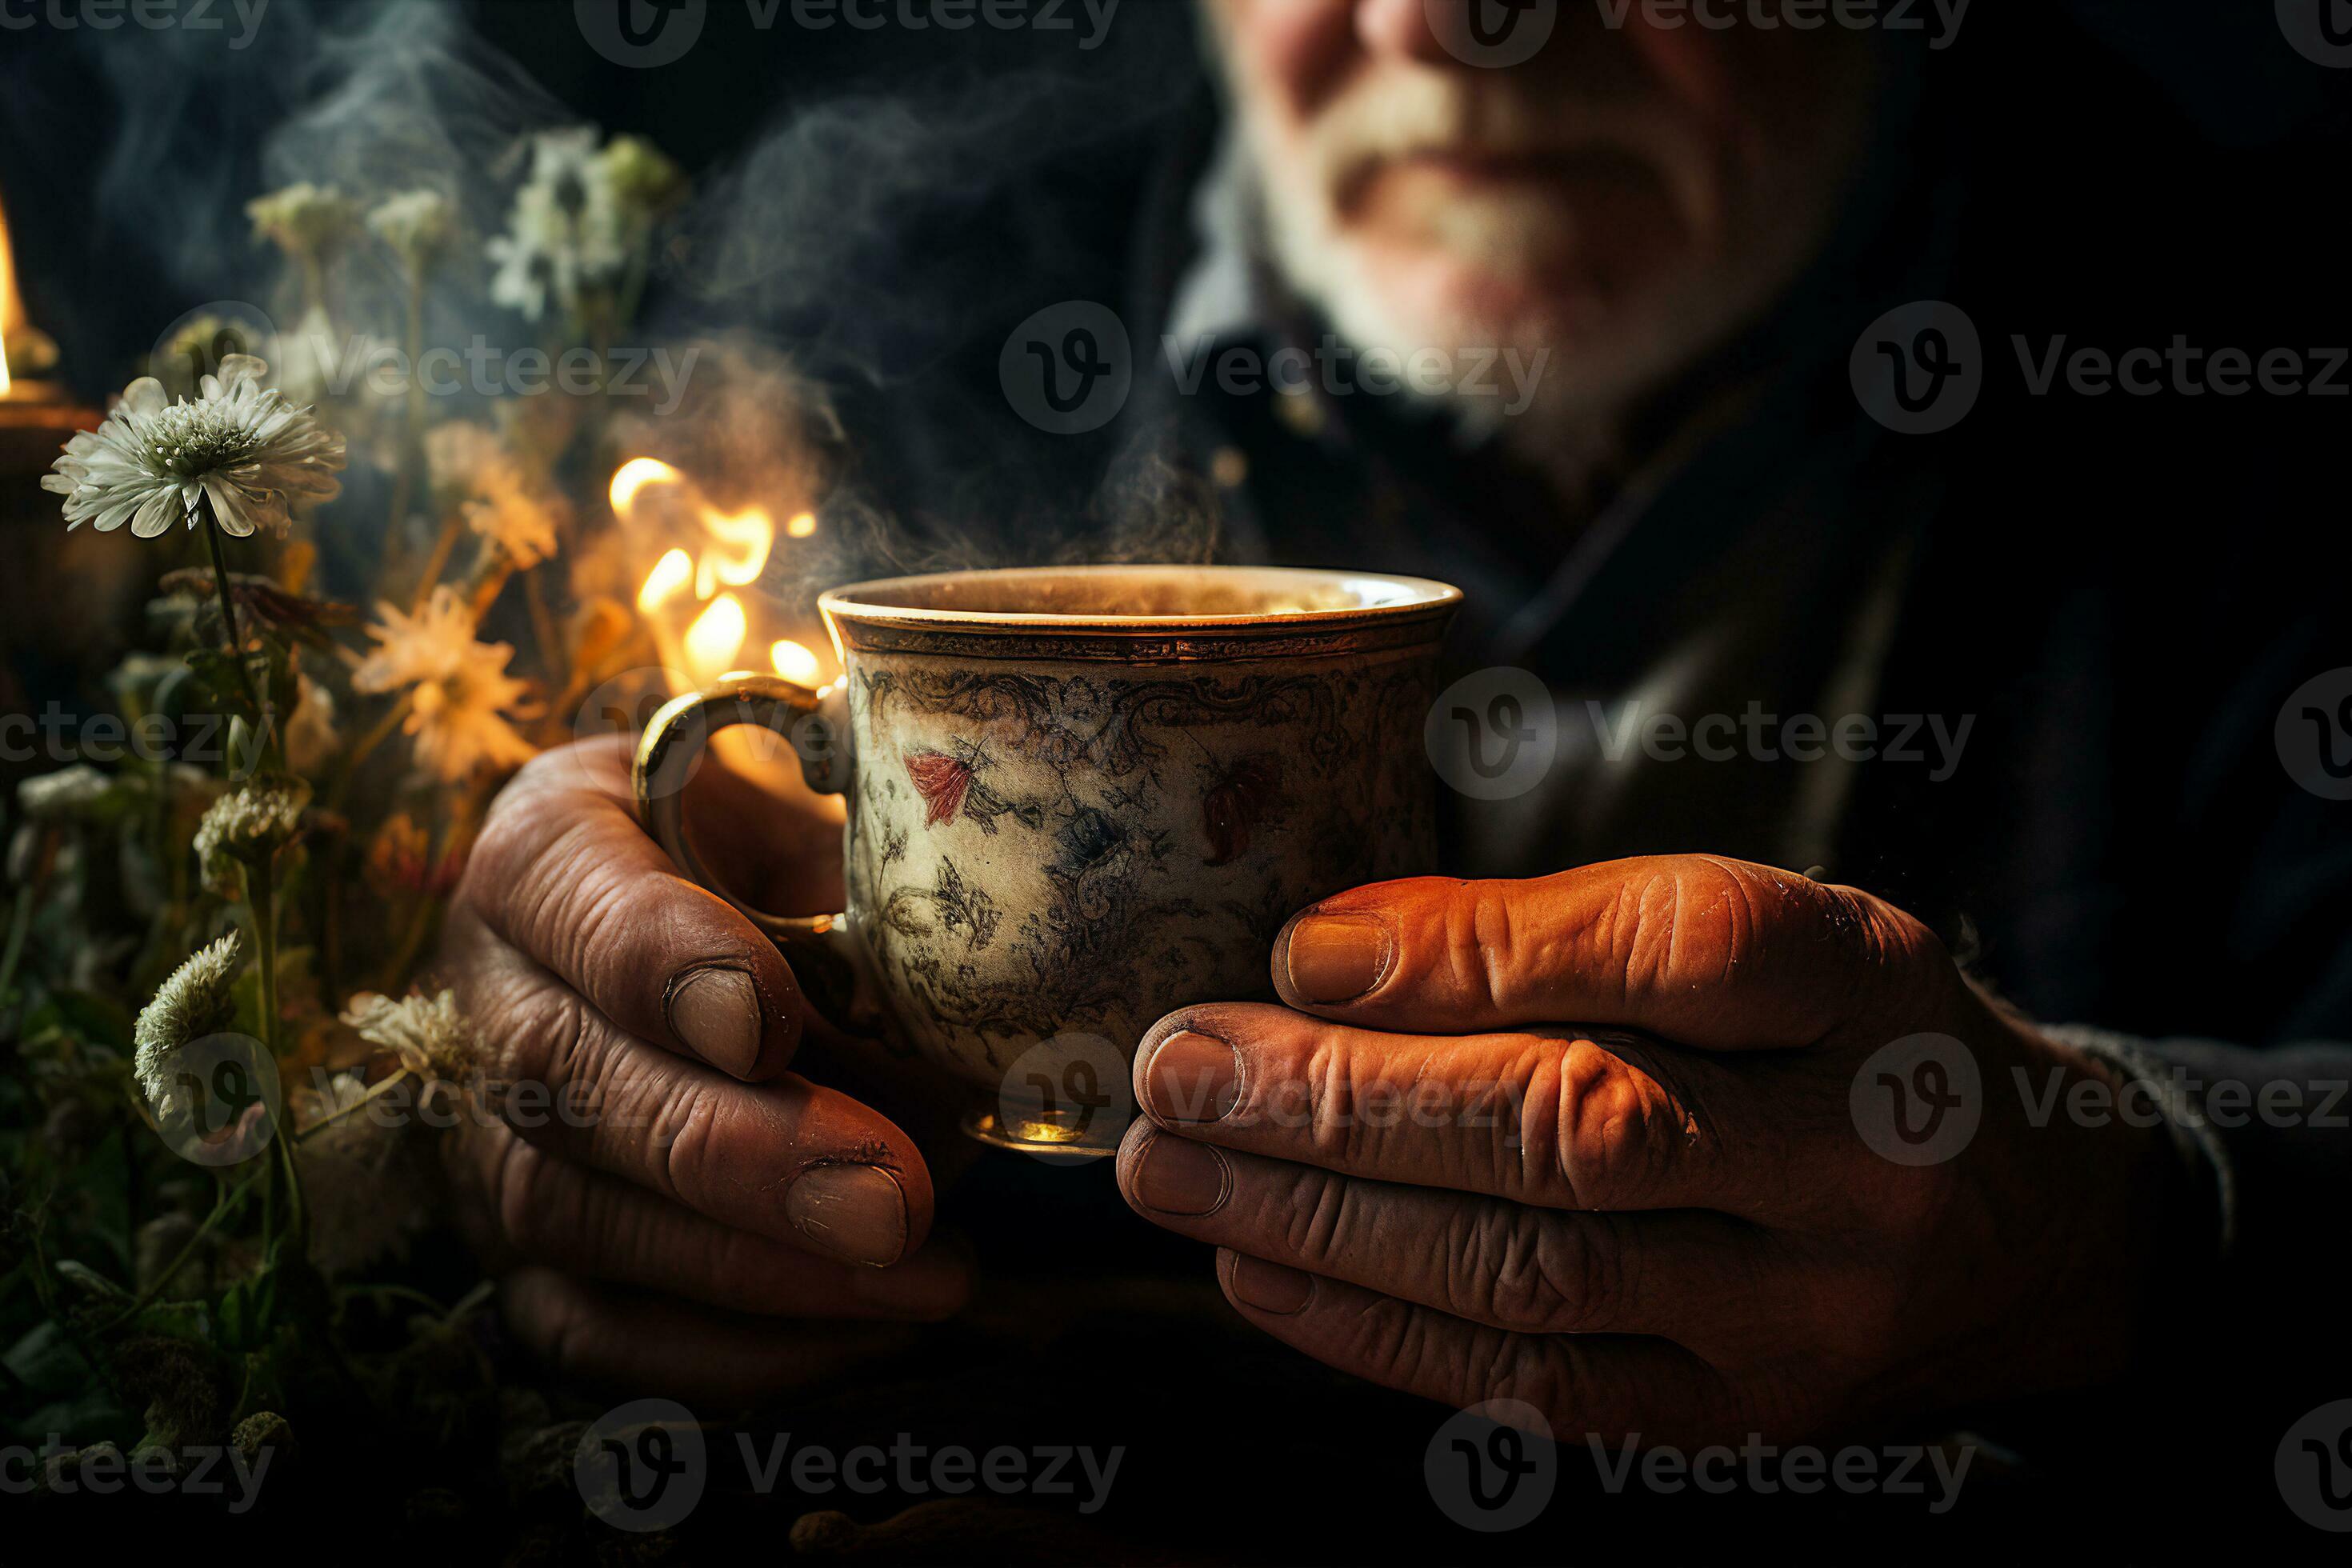 An elderly man is sitting in a pantry where herbs are drying and